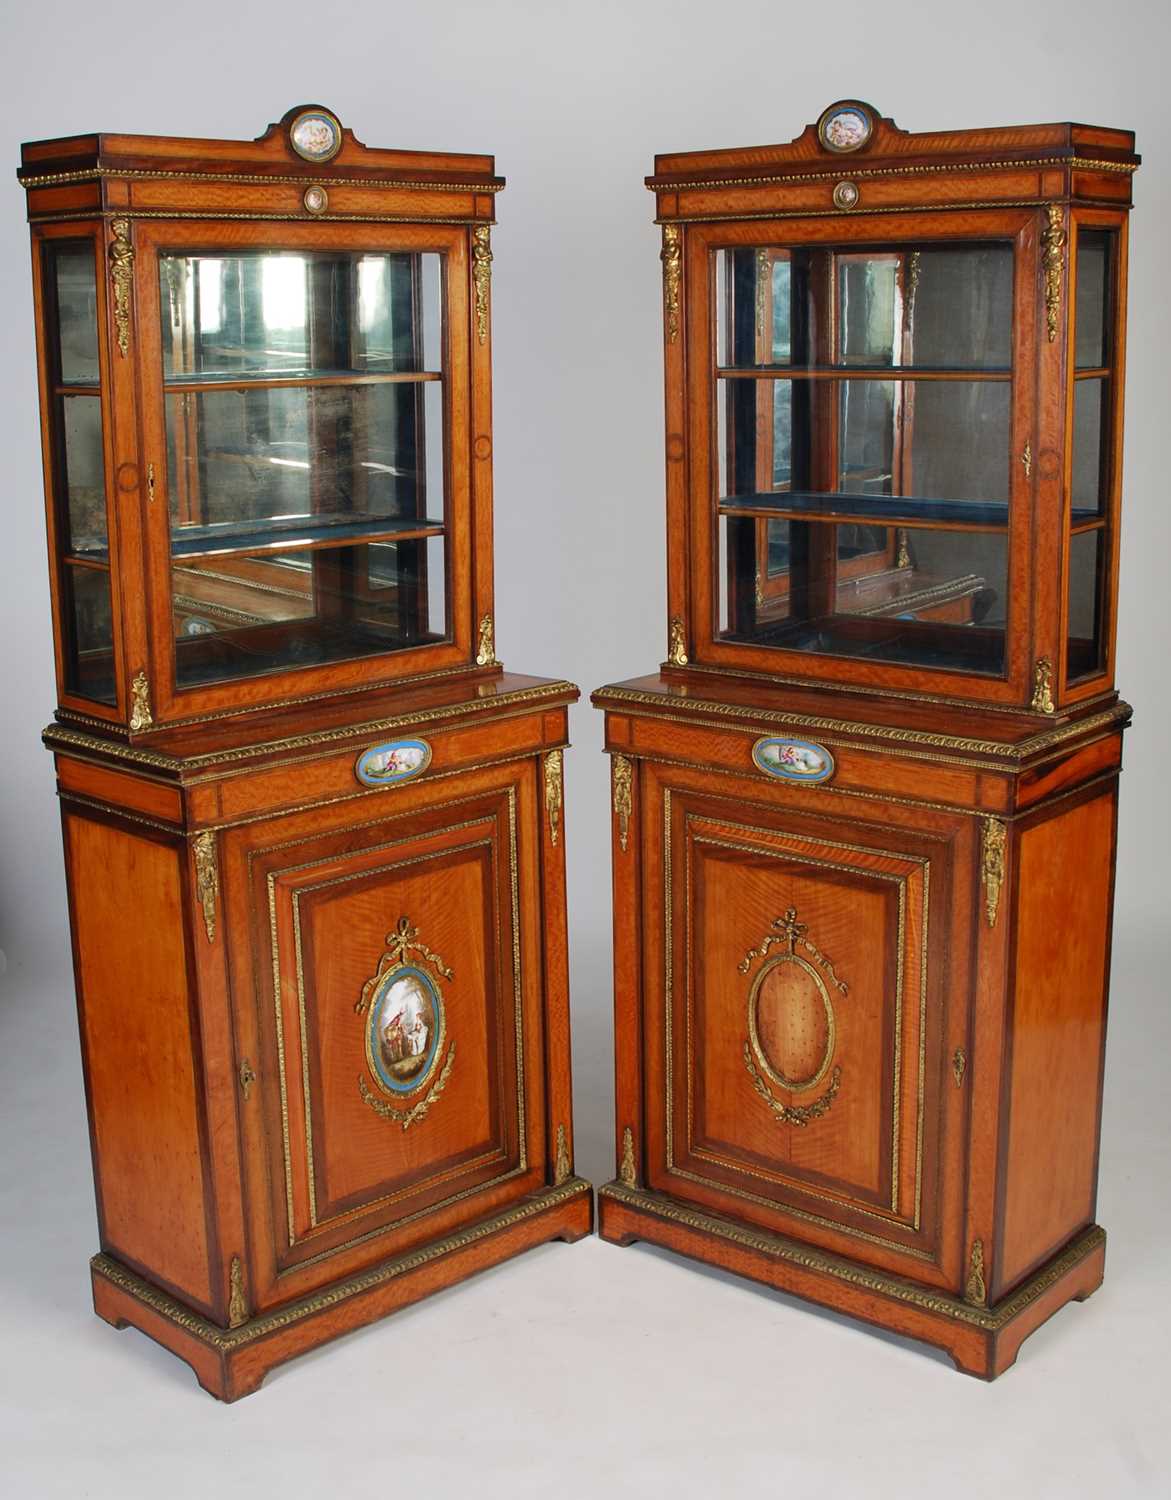 A pair of late 19th century satinwood, porcelain and gilt metal mounted display cabinets, the